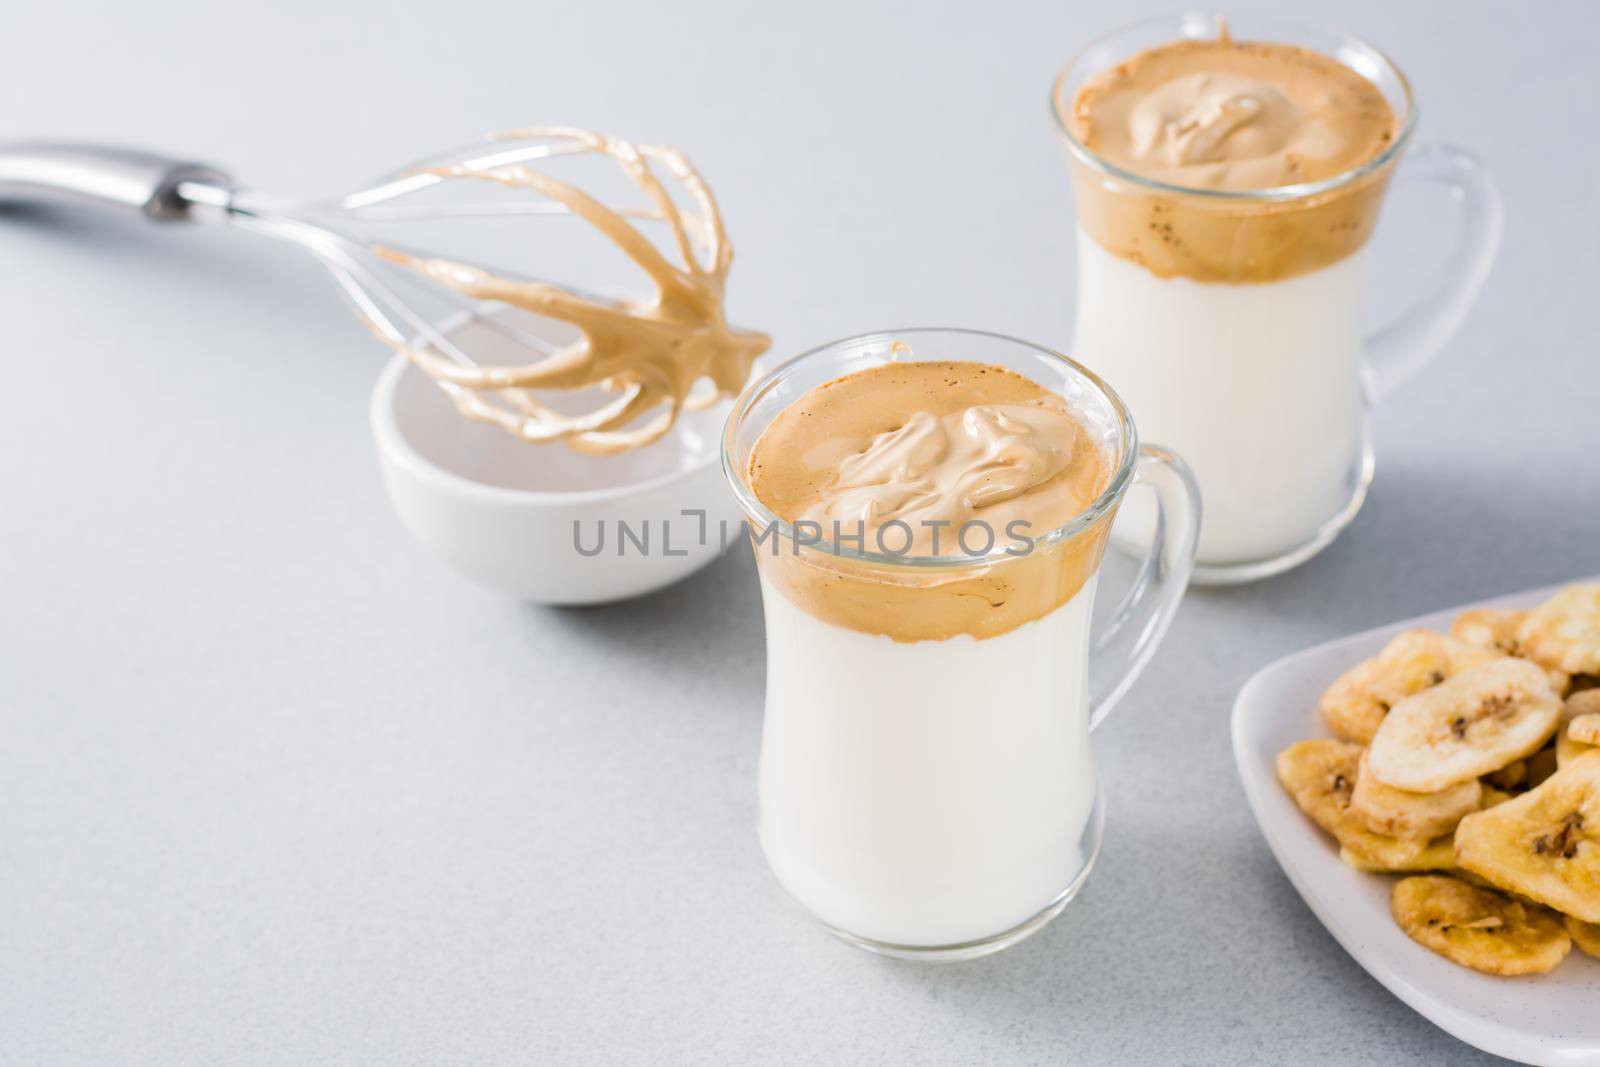 Quarantine trendy cuisine. Two cups with dalgona coffee and banana chips and a whisk on a gray background. by Aleruana